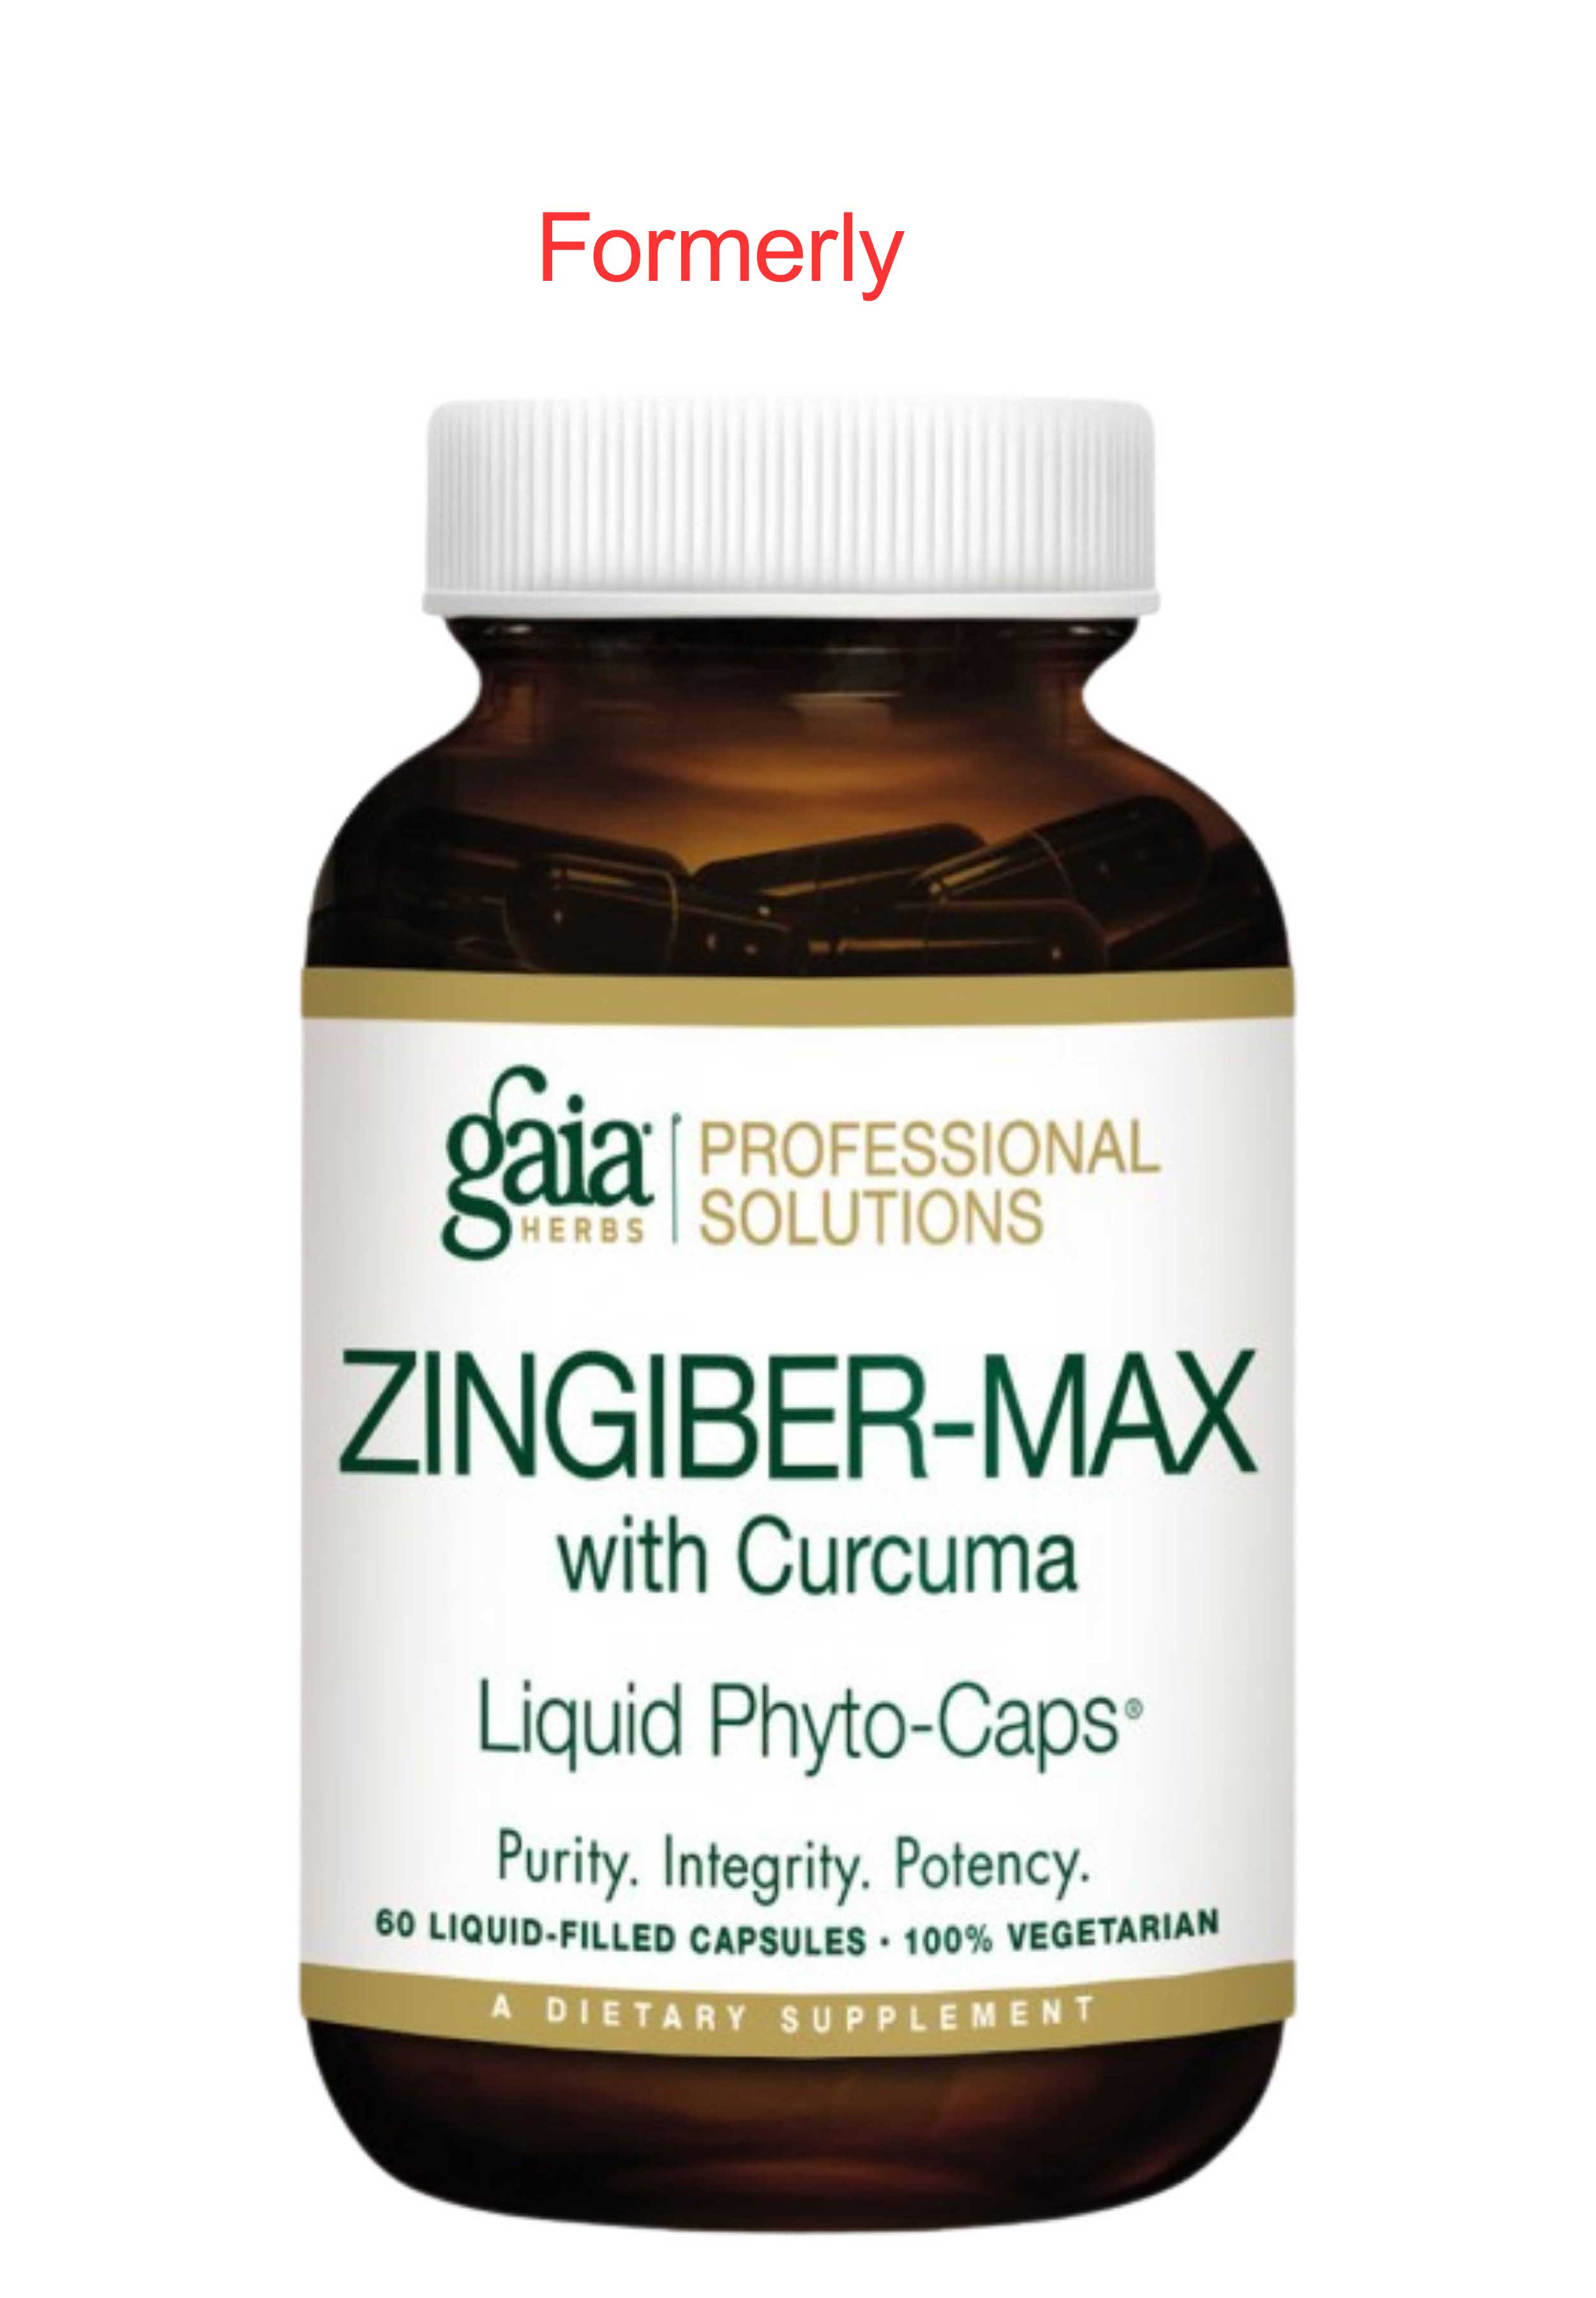 Gaia Herbs Professional Solutions Ginger & Turmeric PRO (Formerly Zingiber-Max) Formerly